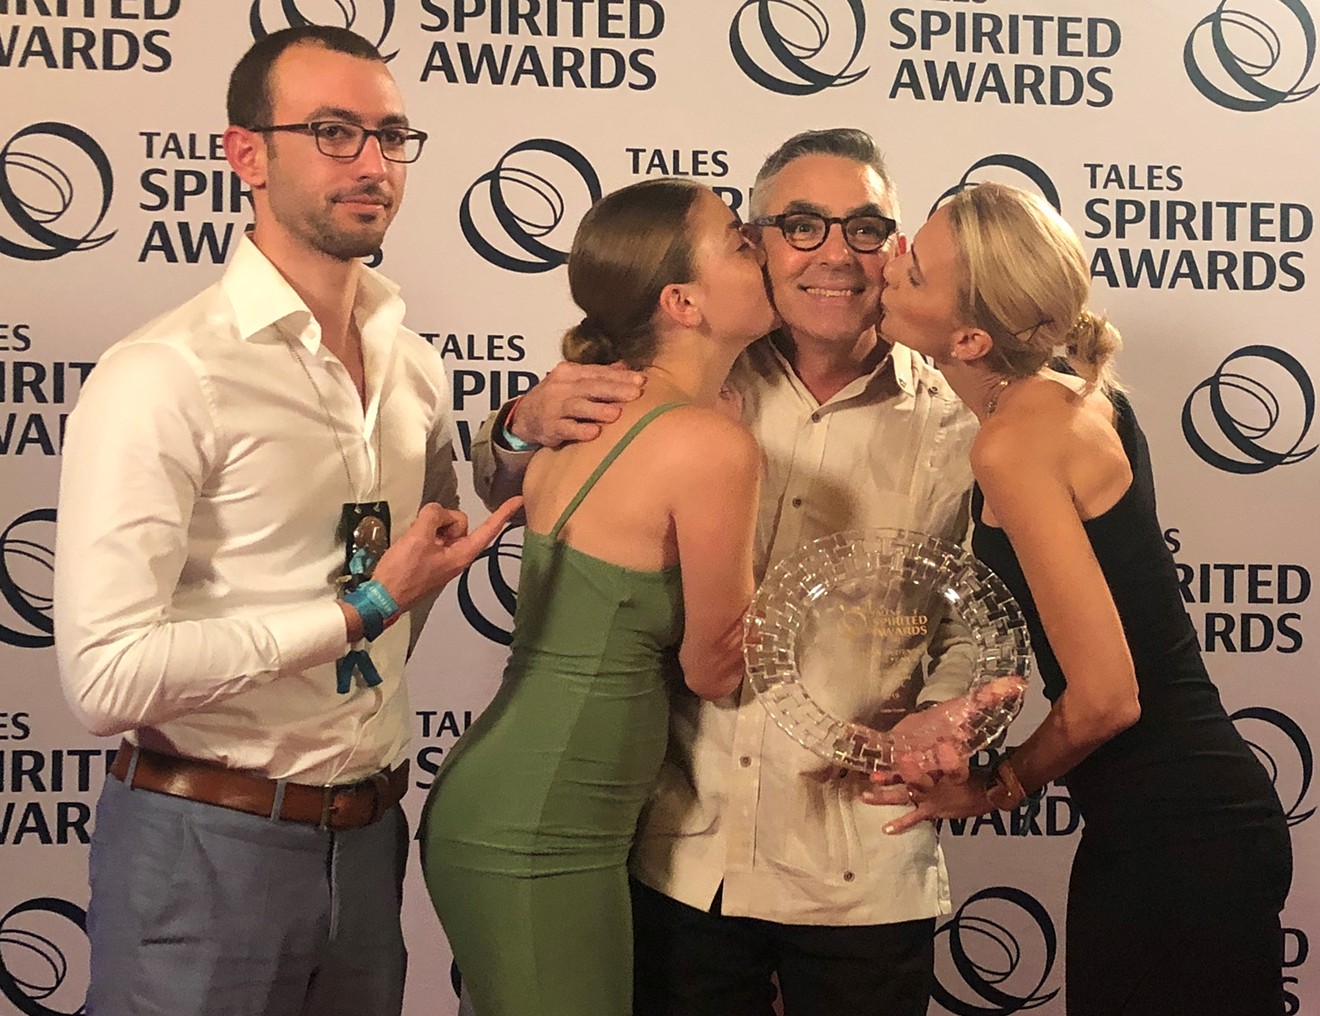 Julio Cabrera (second from right) is joined by son Andy, daughter Lupe, and wife Betty after winning American Bartender of the Year at Tales of the Cocktail's 2019 Spirited Awards.